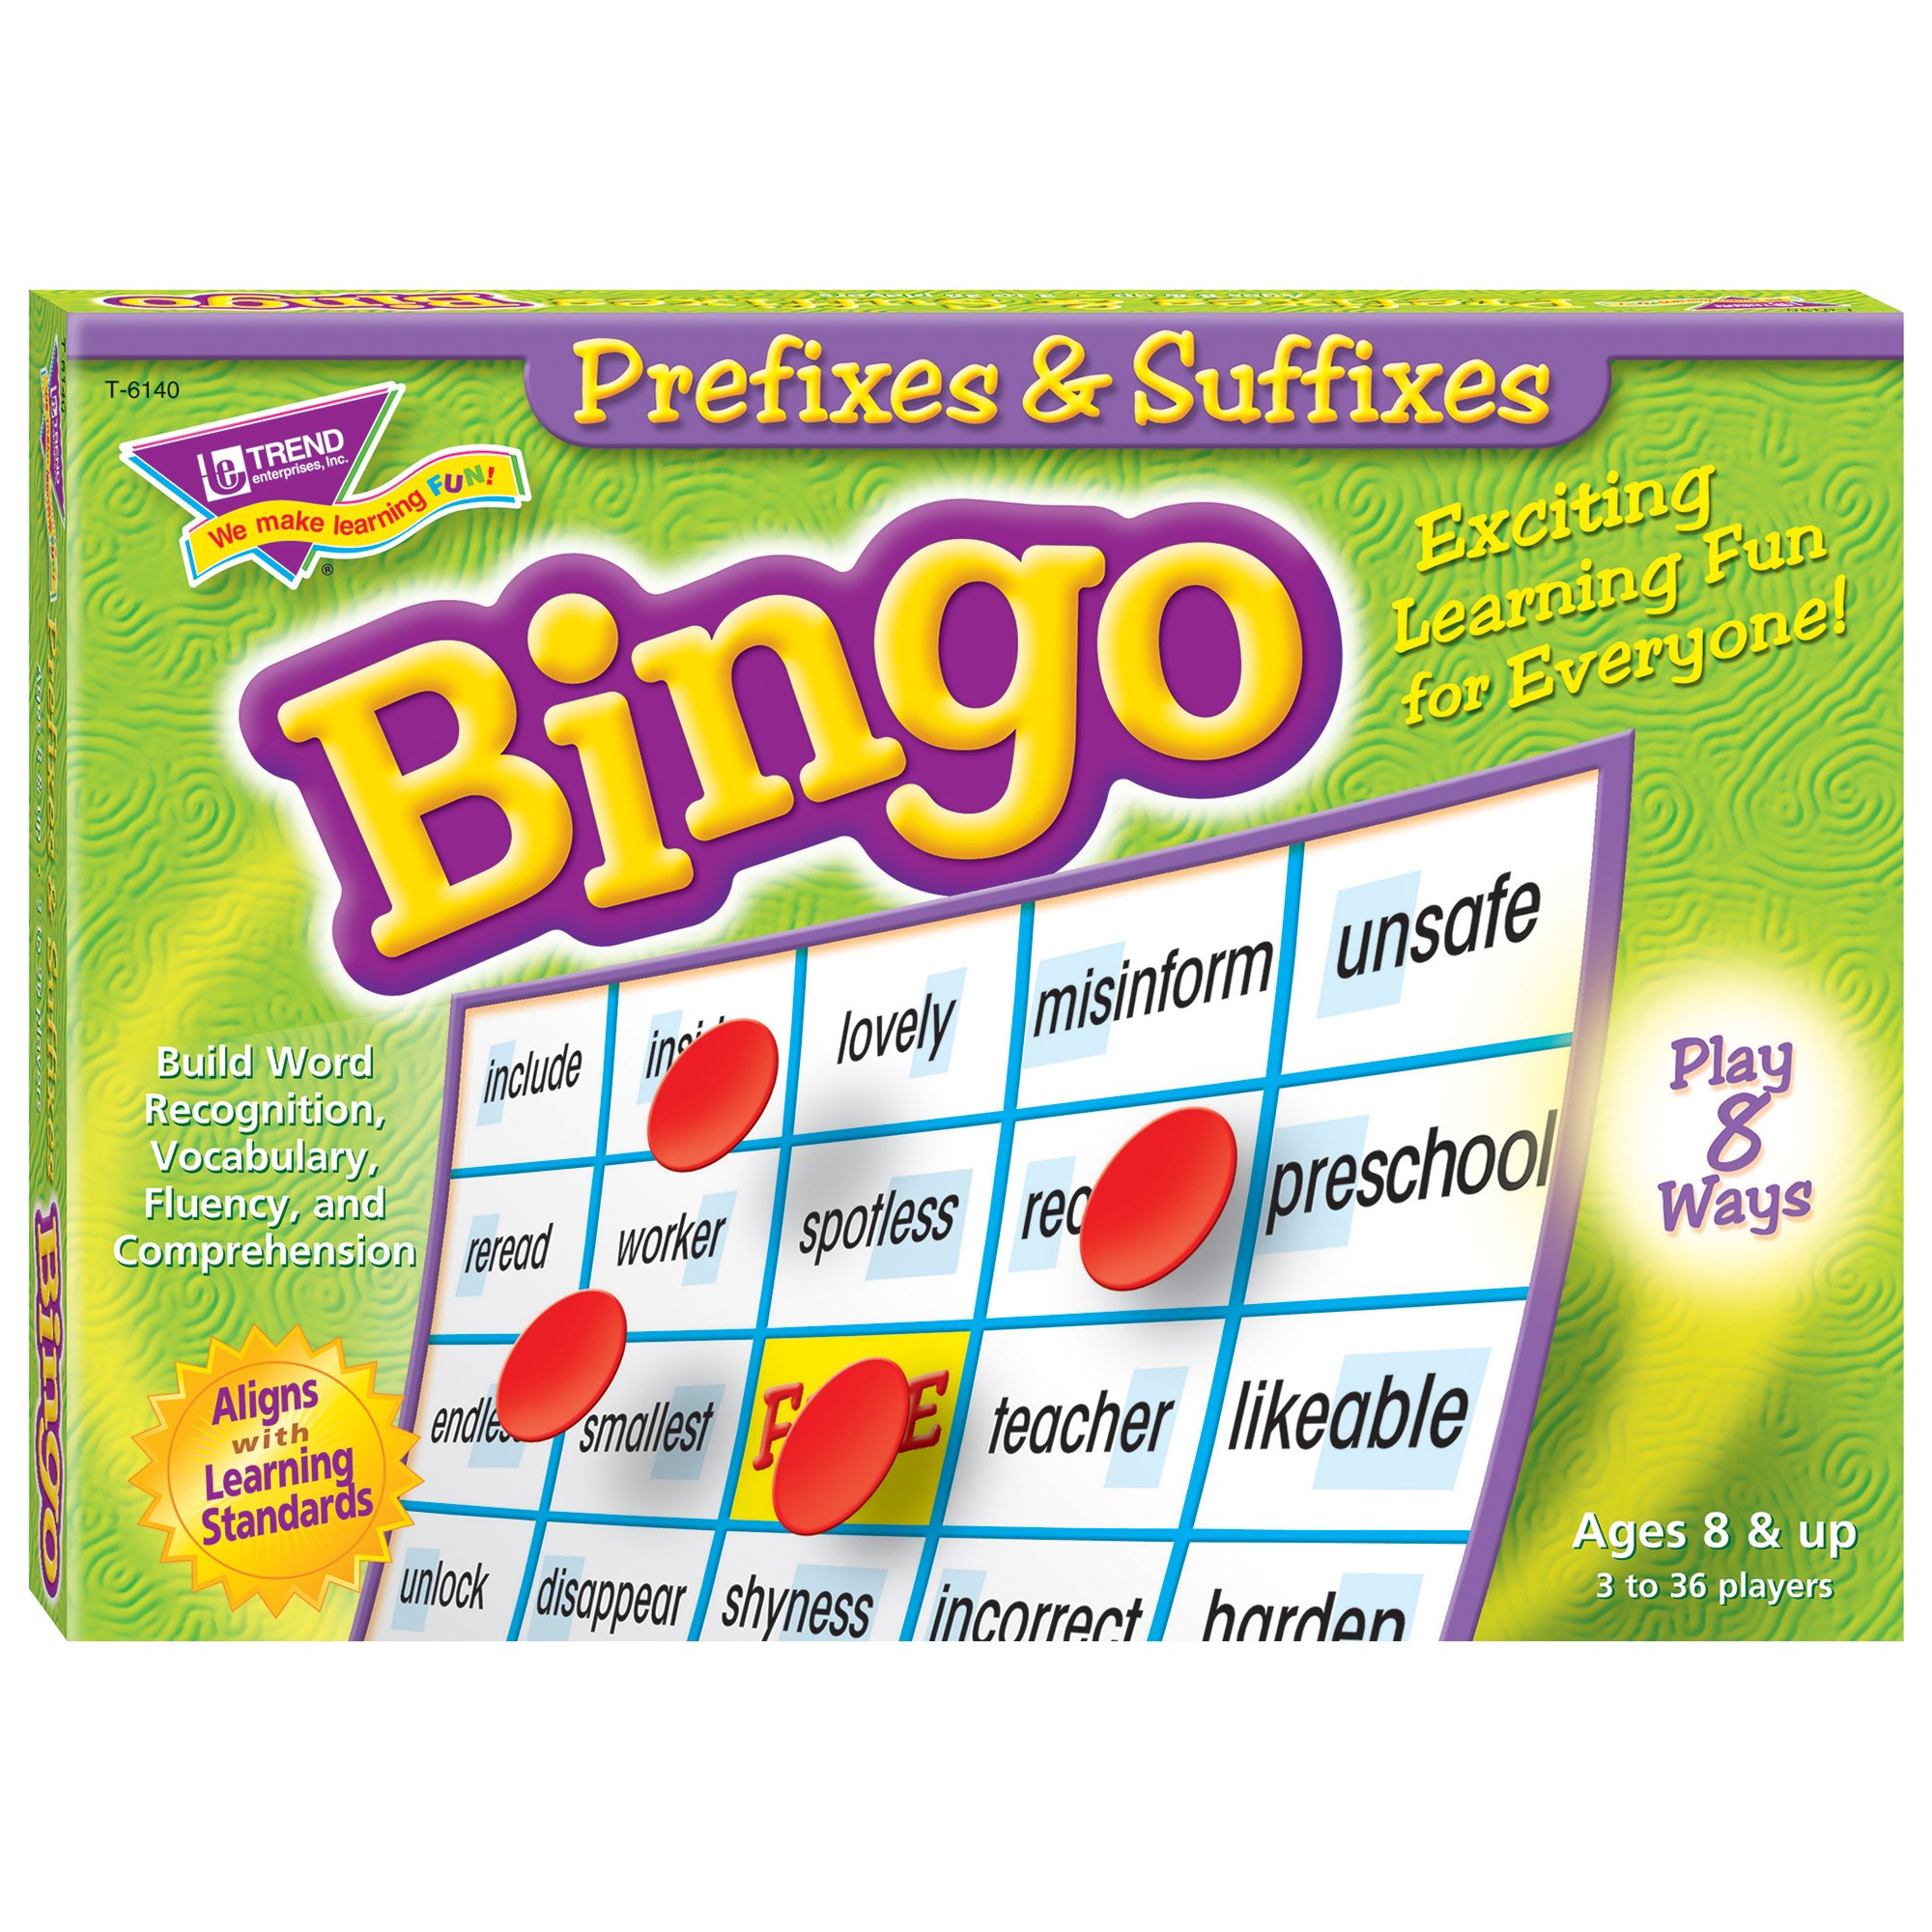 TREND ENTERPRISES: Prefixes & Suffixes Bingo Game, Exciting Way for Everyone to Learn, Play 8 Different Ways, Great for Classrooms and At Home, 2 to 36 Players, For Ages 8 and Up